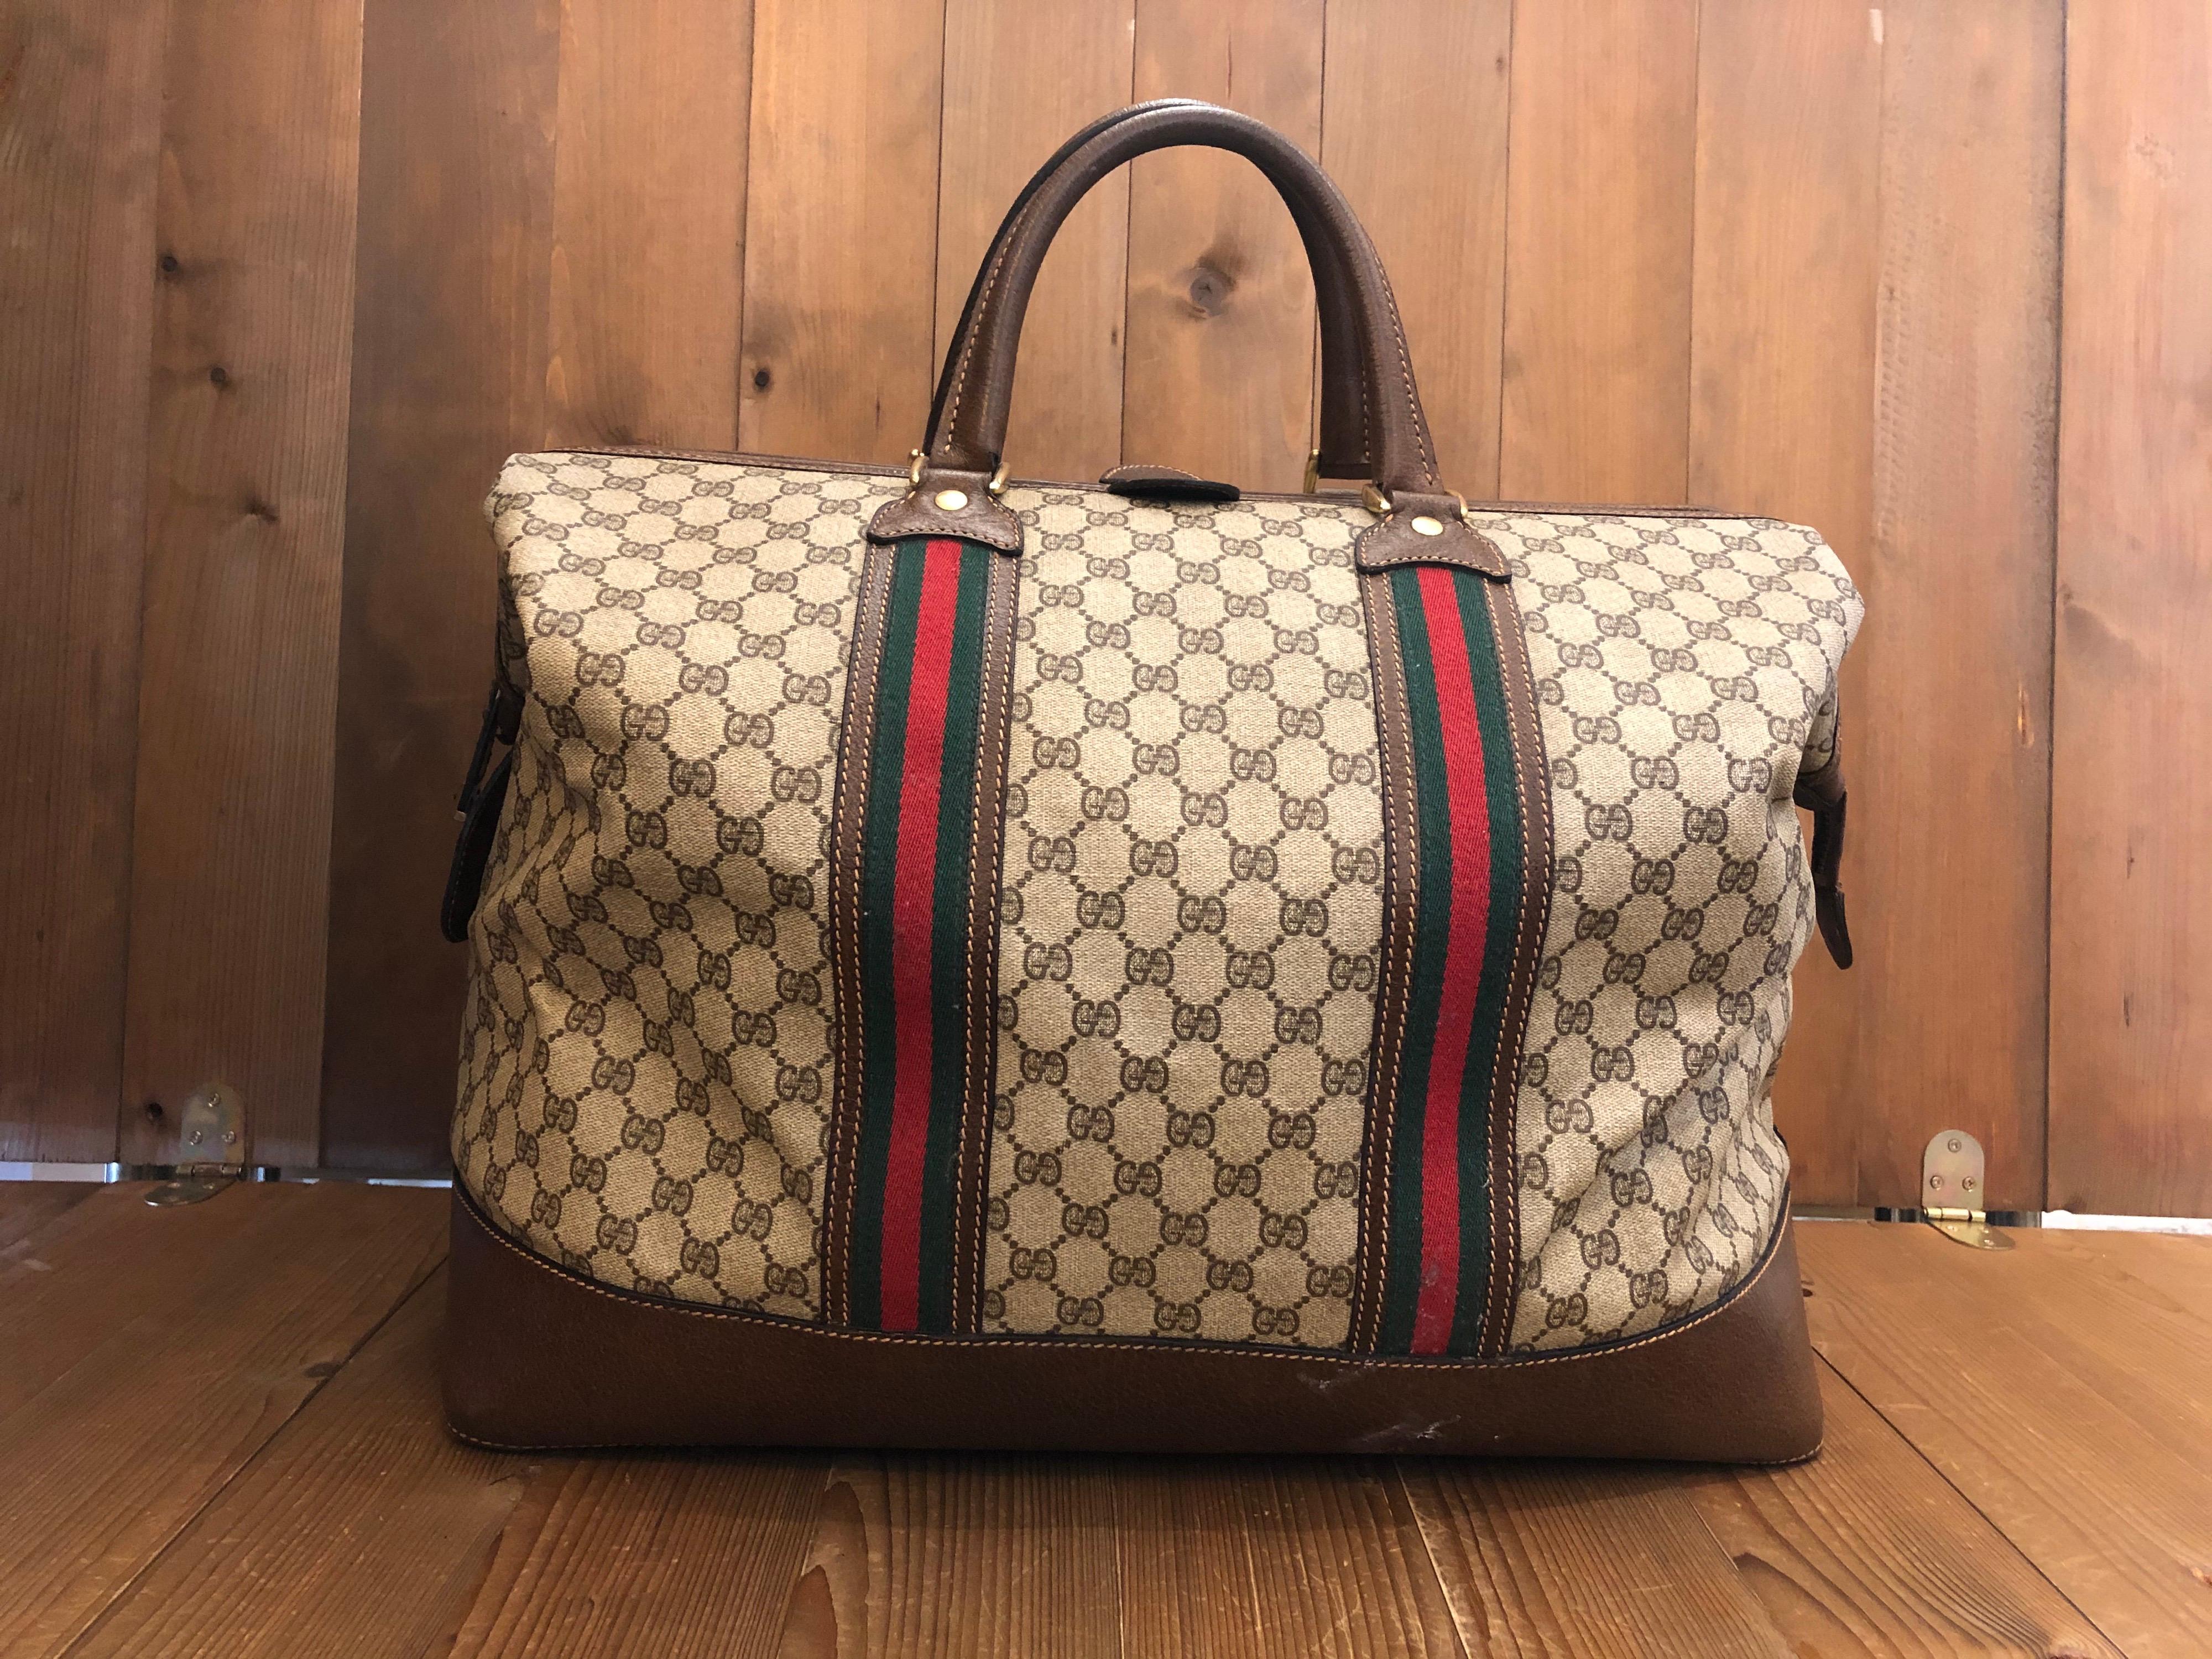 Rare Gucci web doctor duffle in brown GG monogram coated canvas and leather from the 1970s era. Made in Italy. Measures 19 x 13 x 9.5 inches

Condition - Some signs of wear consistent with age and normal use.

Outside: Some signs of wear on leather